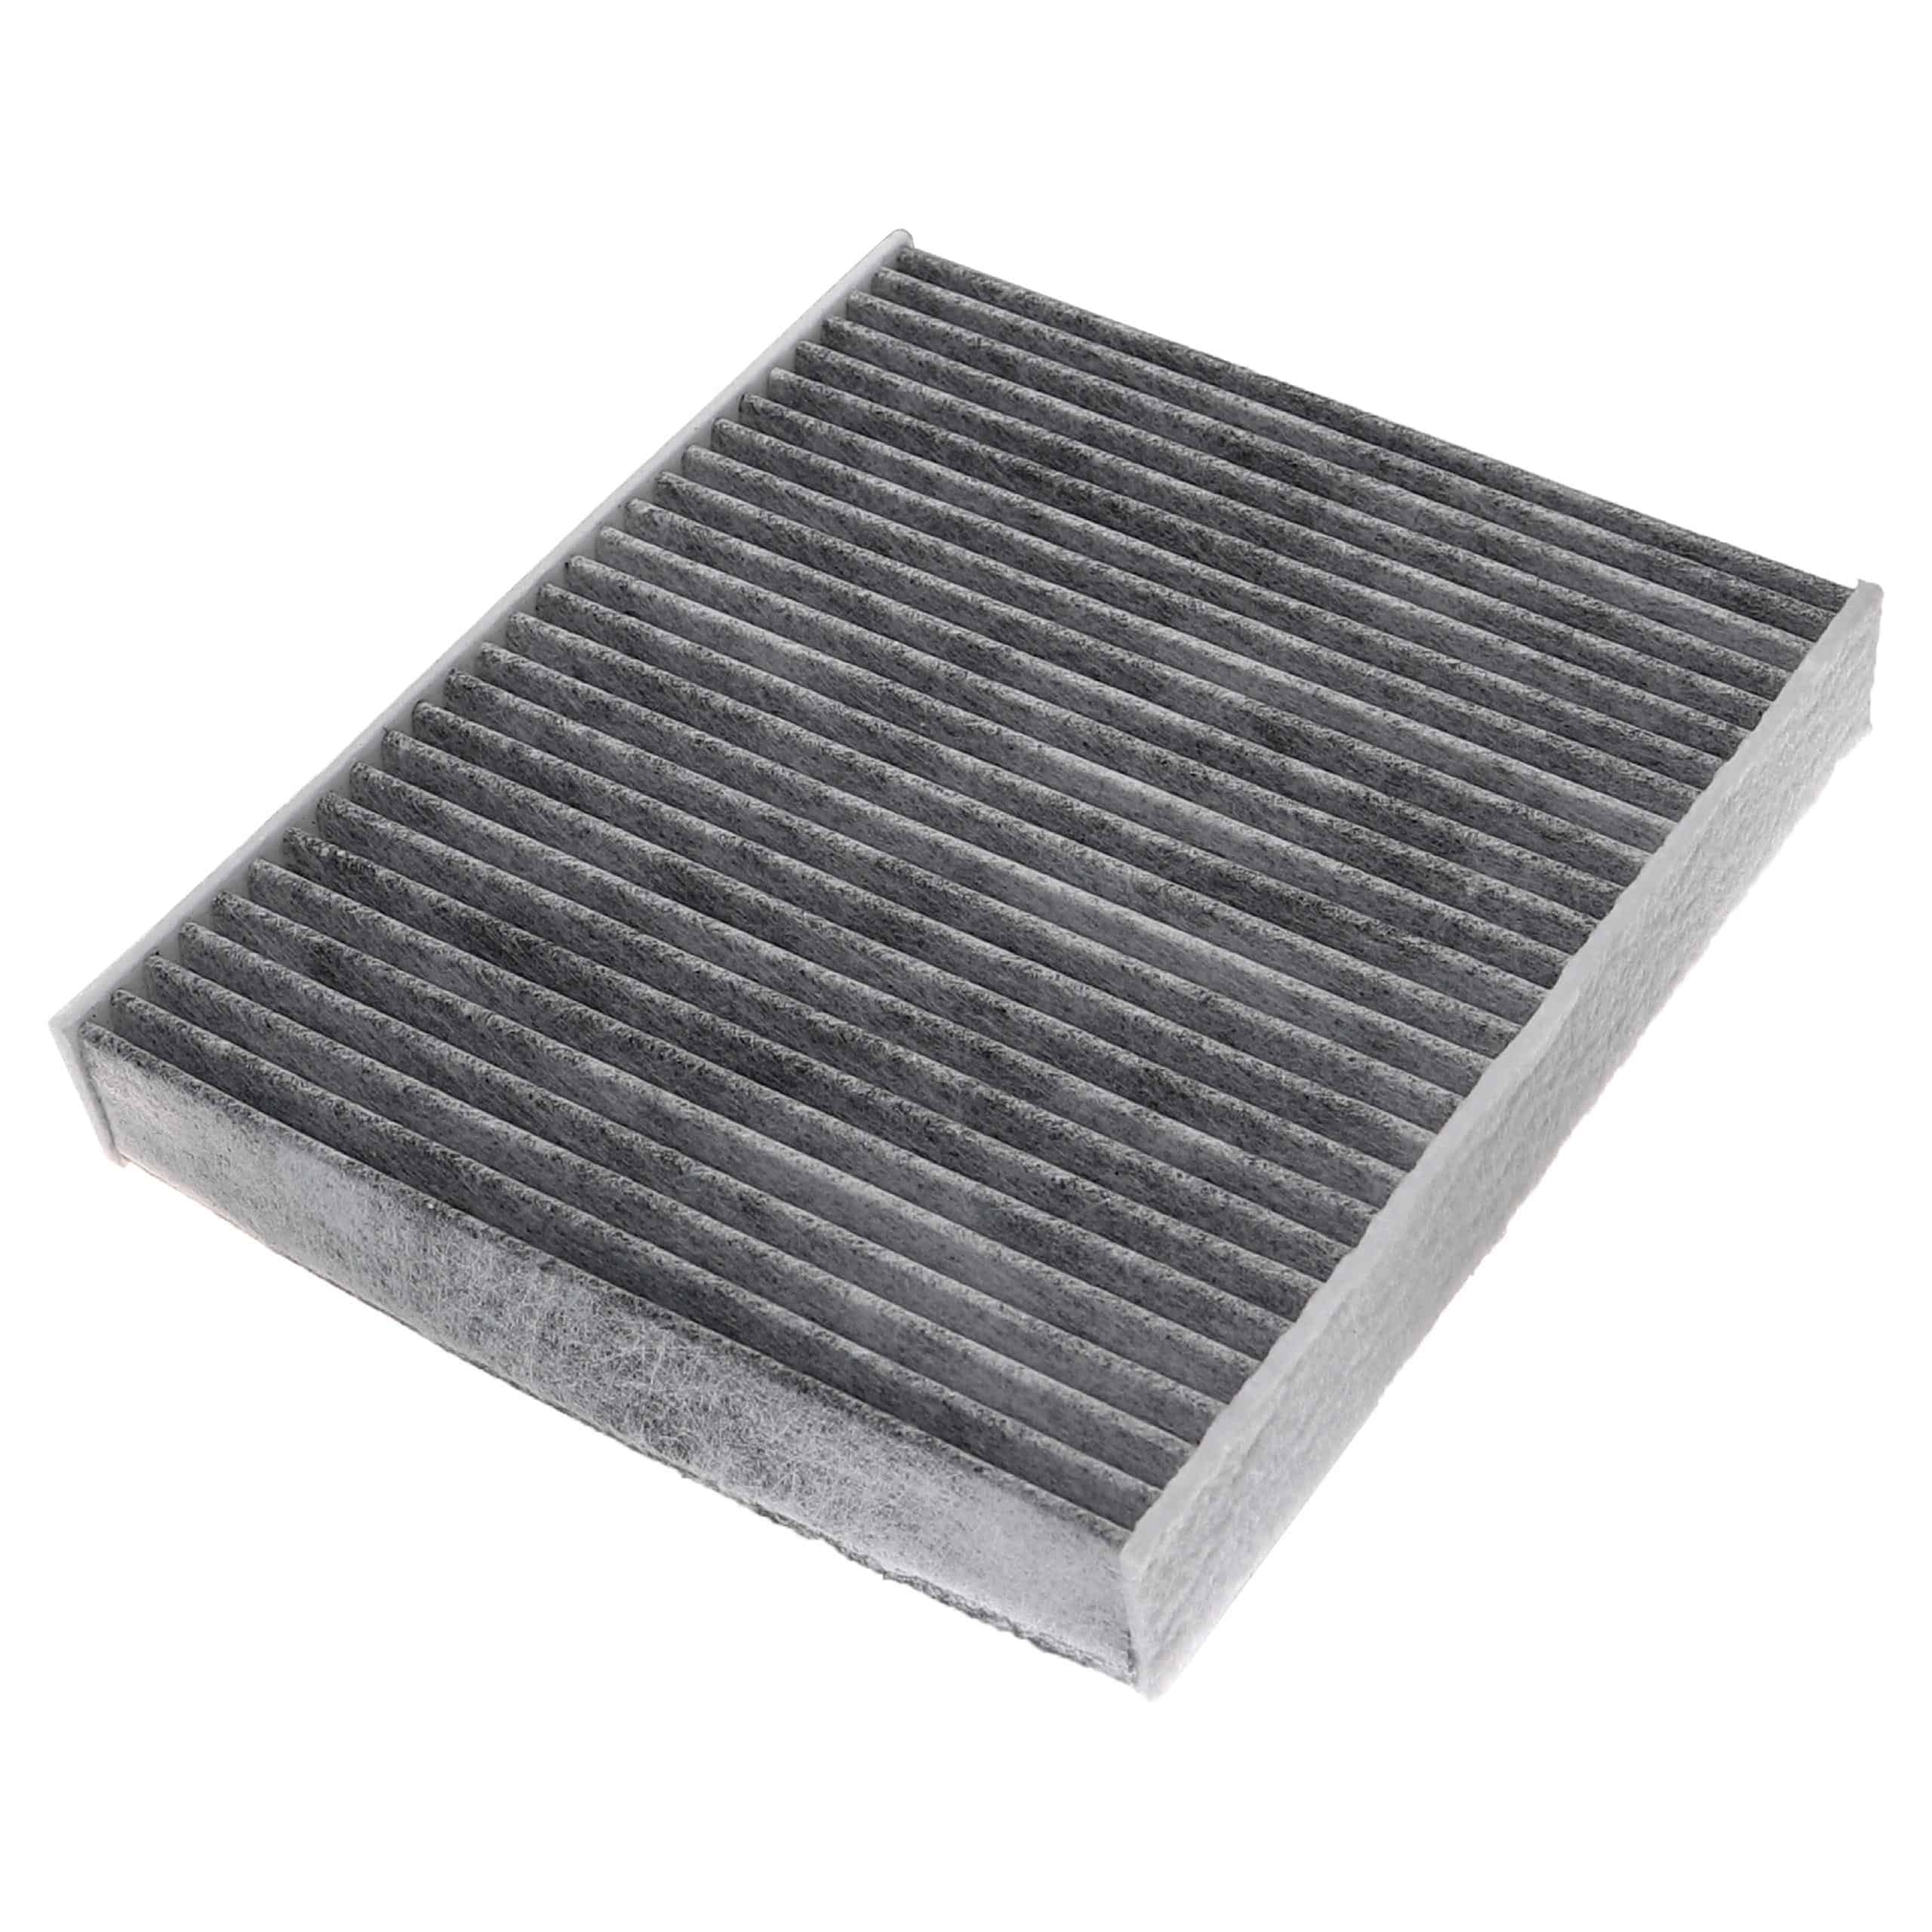 Cabin Air Filter replaces 1A First Automotive C30253 etc.